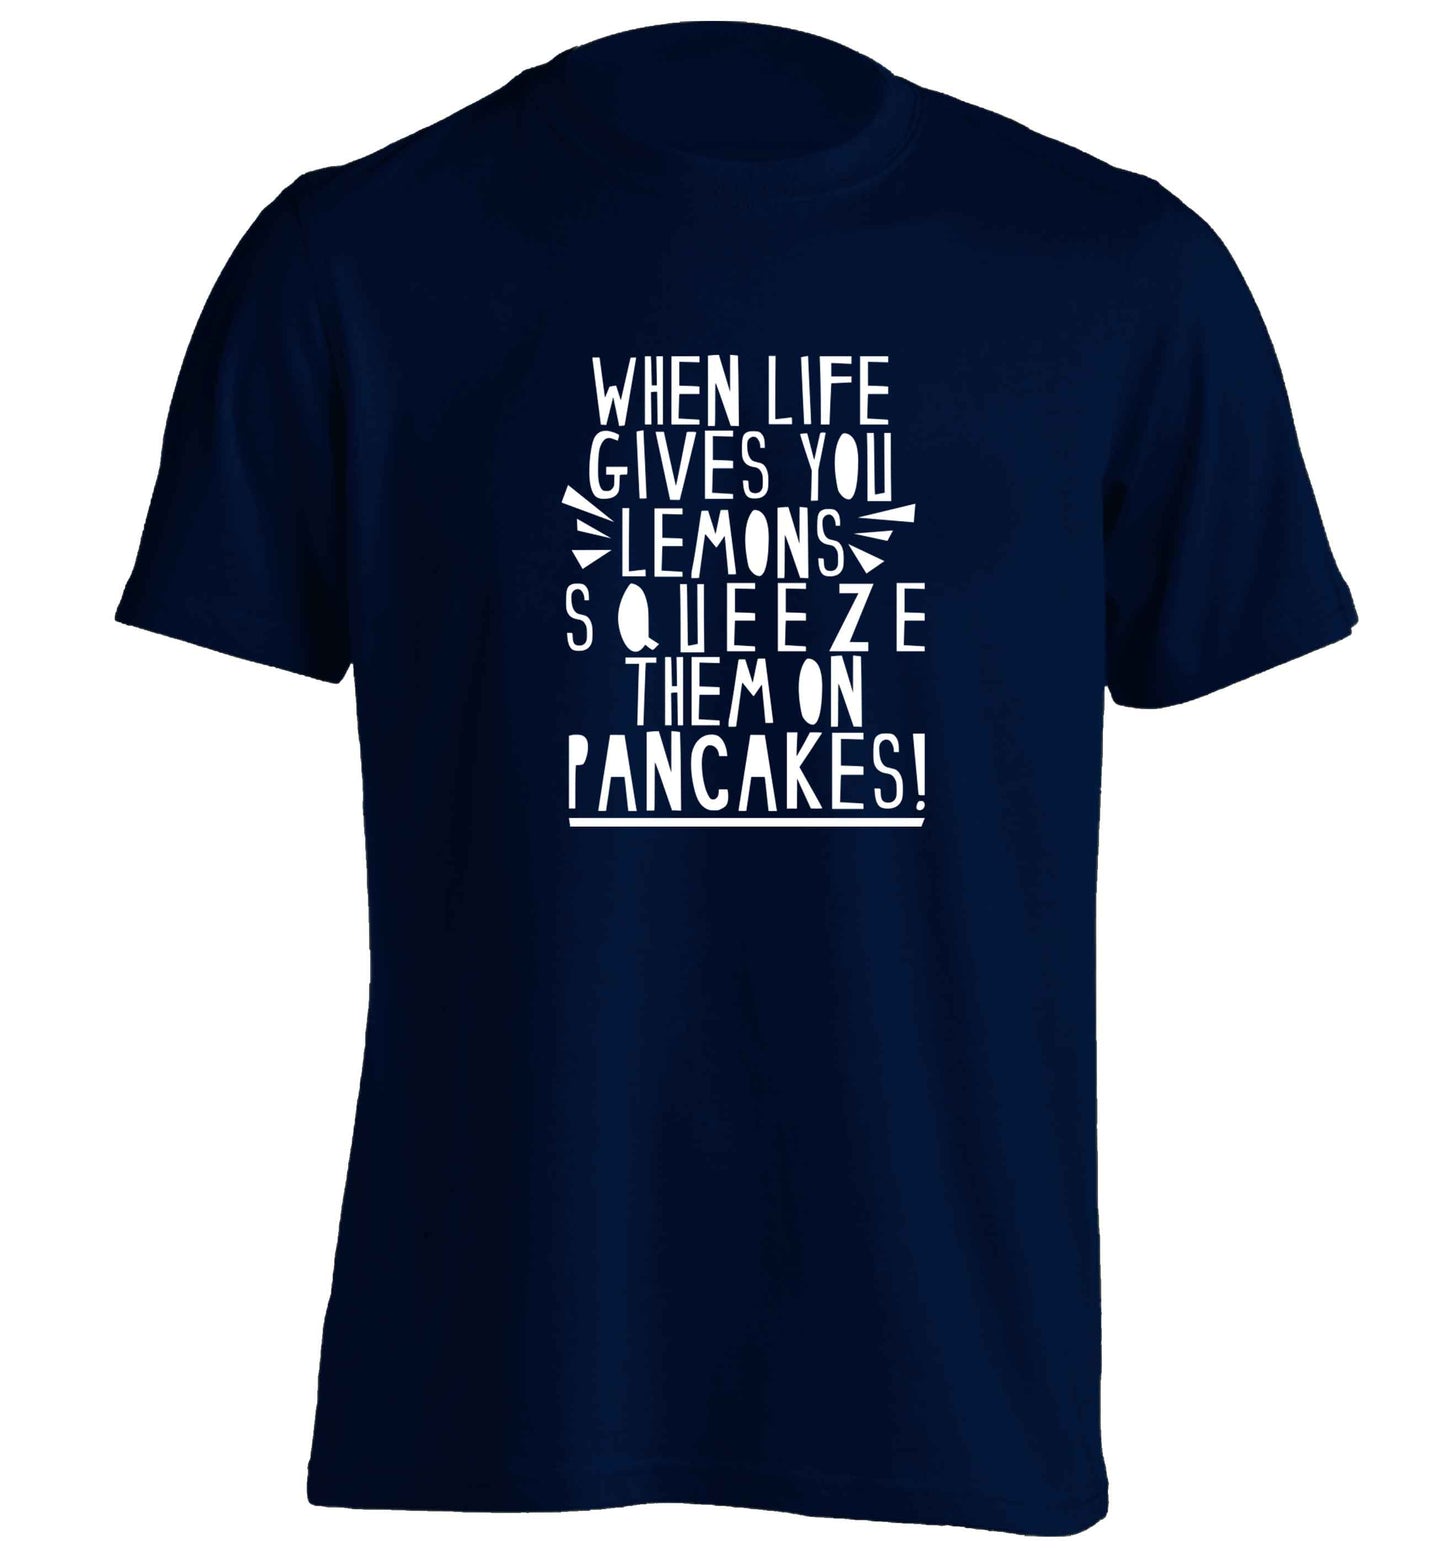 When life gives you lemons squeeze them on pancakes! adults unisex navy Tshirt 2XL